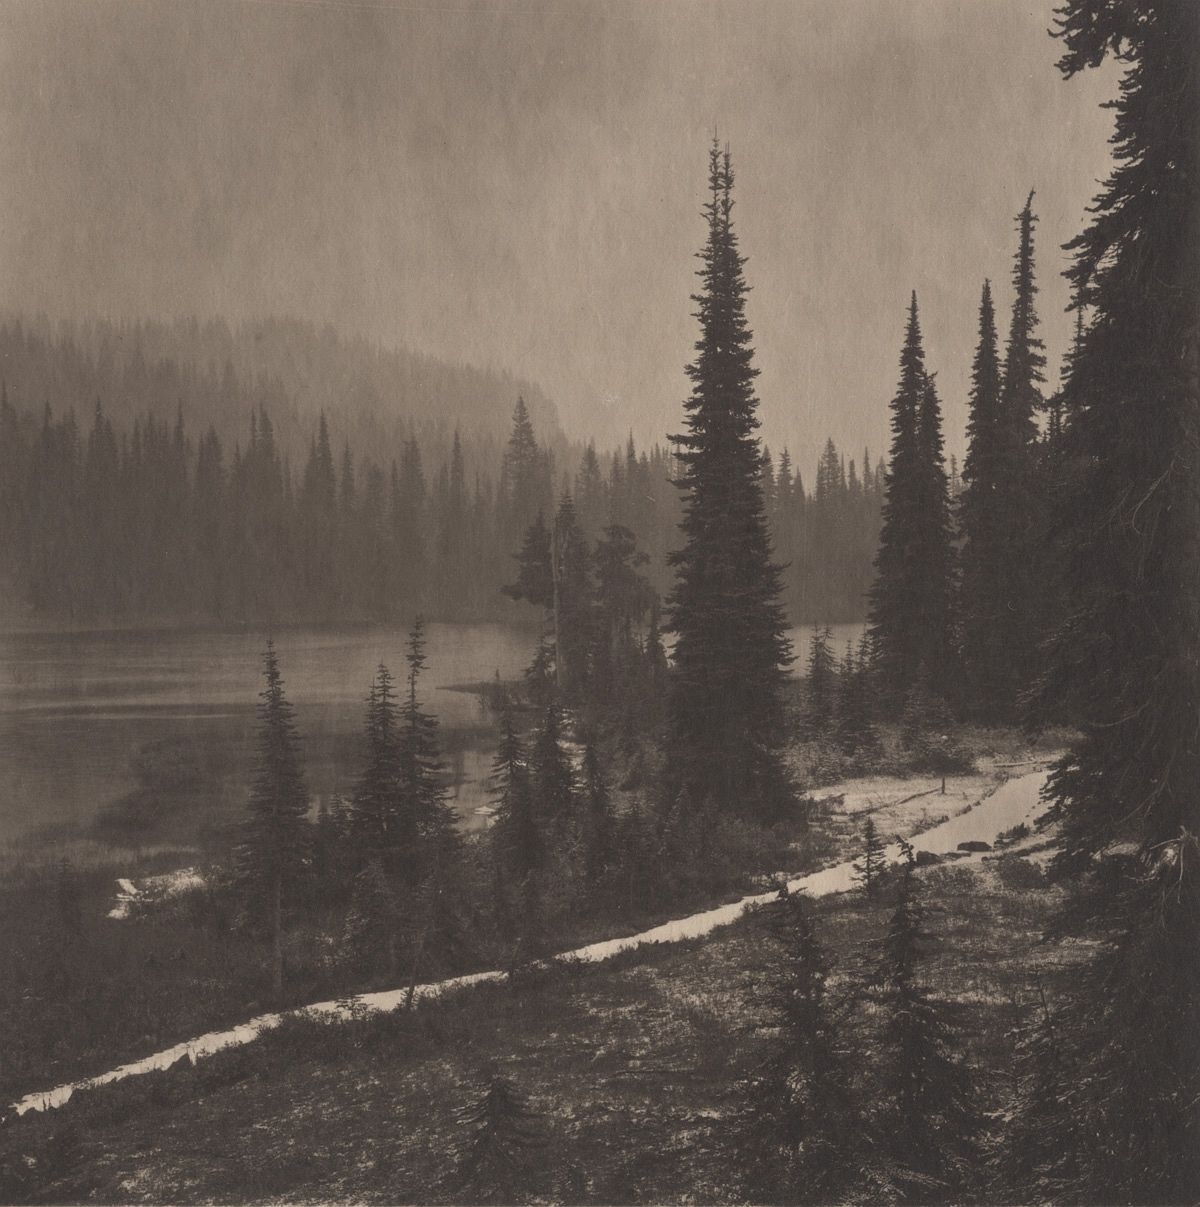 Pacific Northwest: Mt. Rainer #2, 2011/2012 from Silent Respiration of Forests - Pacific Northwest